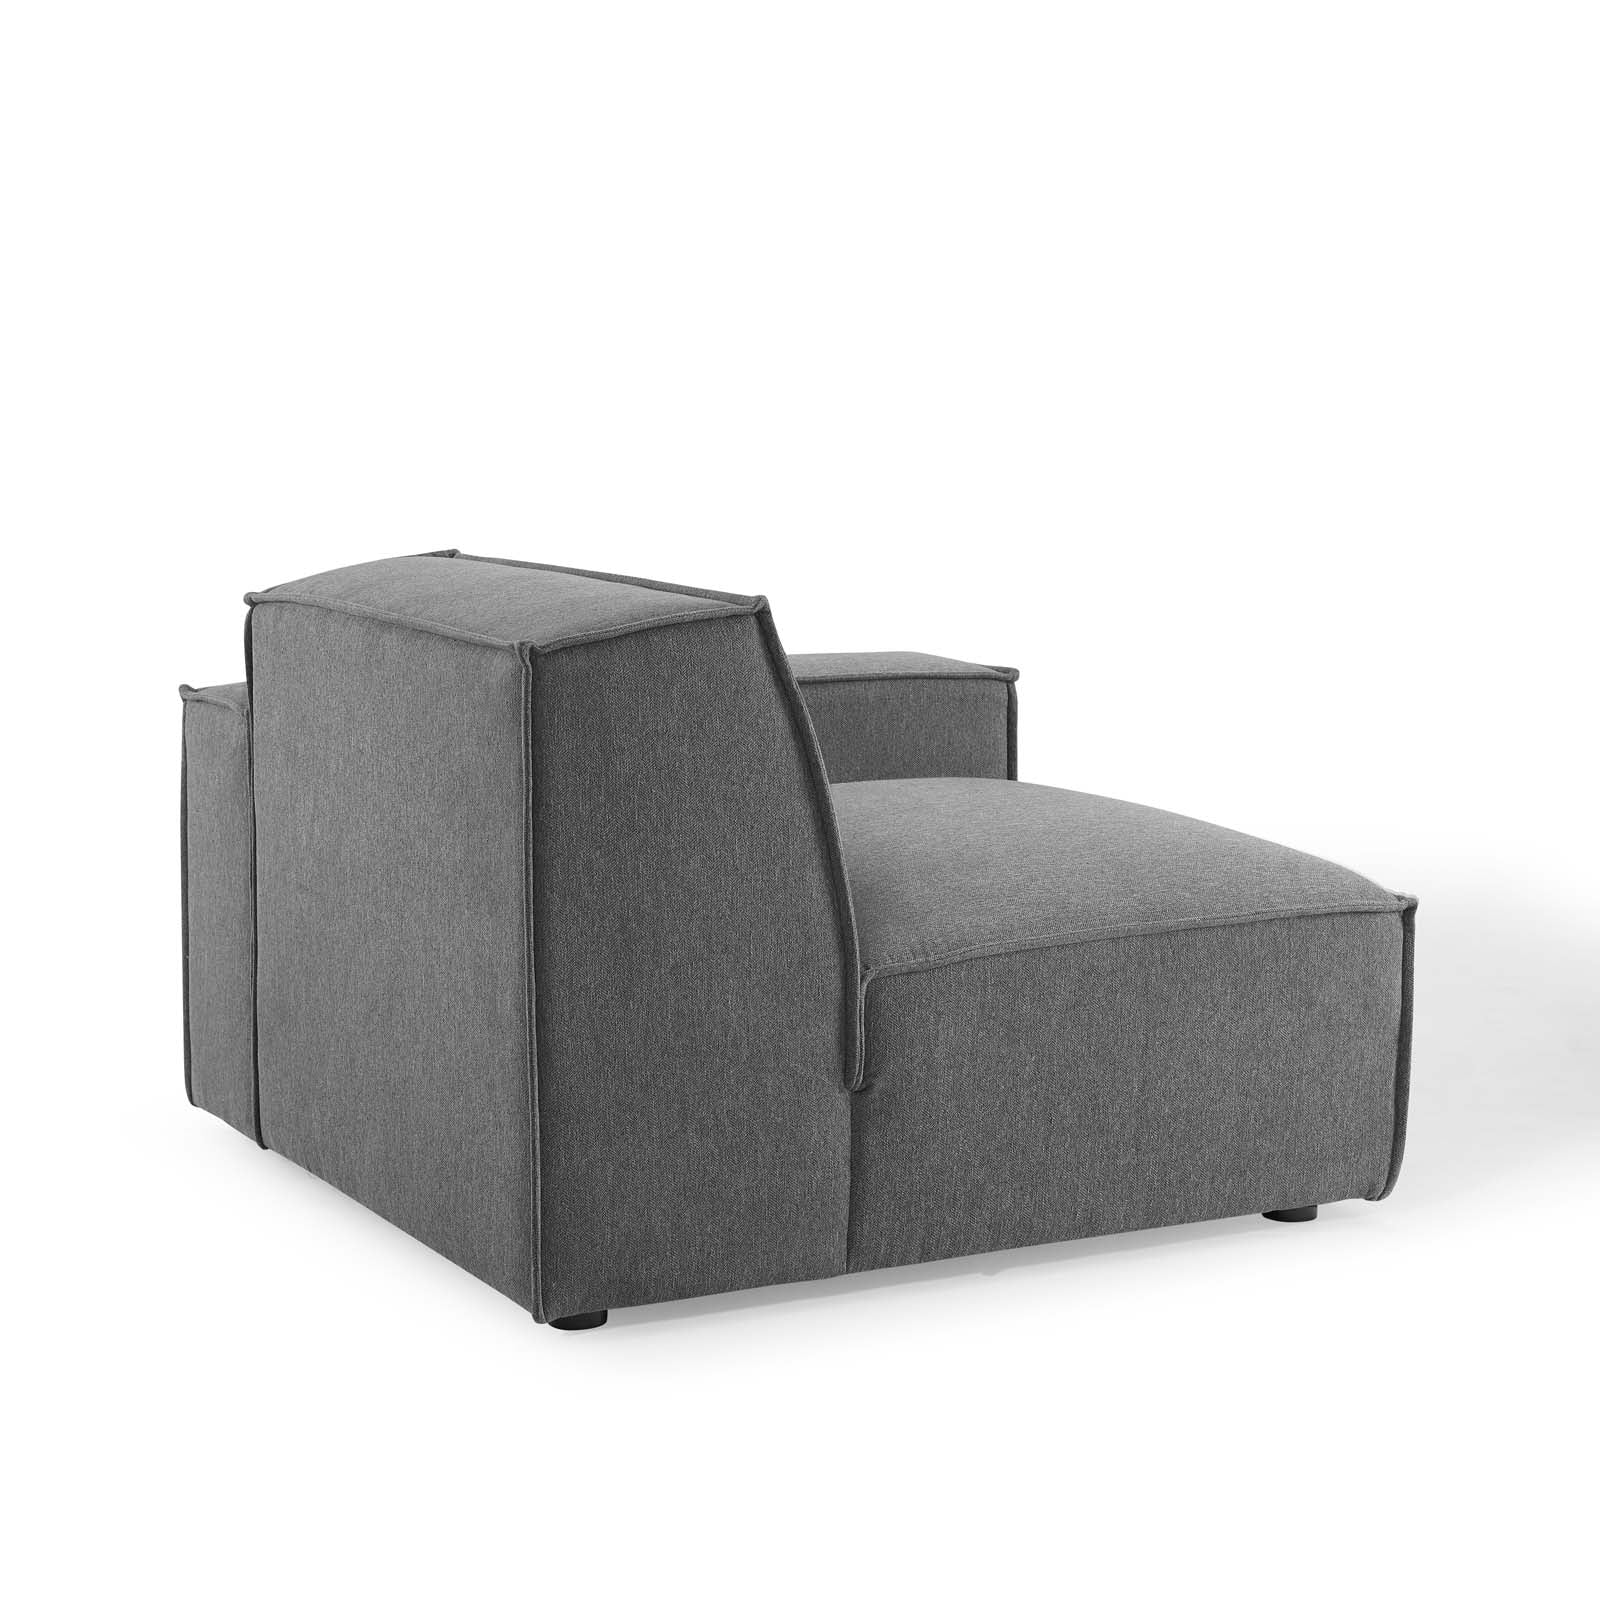 Restore 3-Piece Sectional Sofa - East Shore Modern Home Furnishings